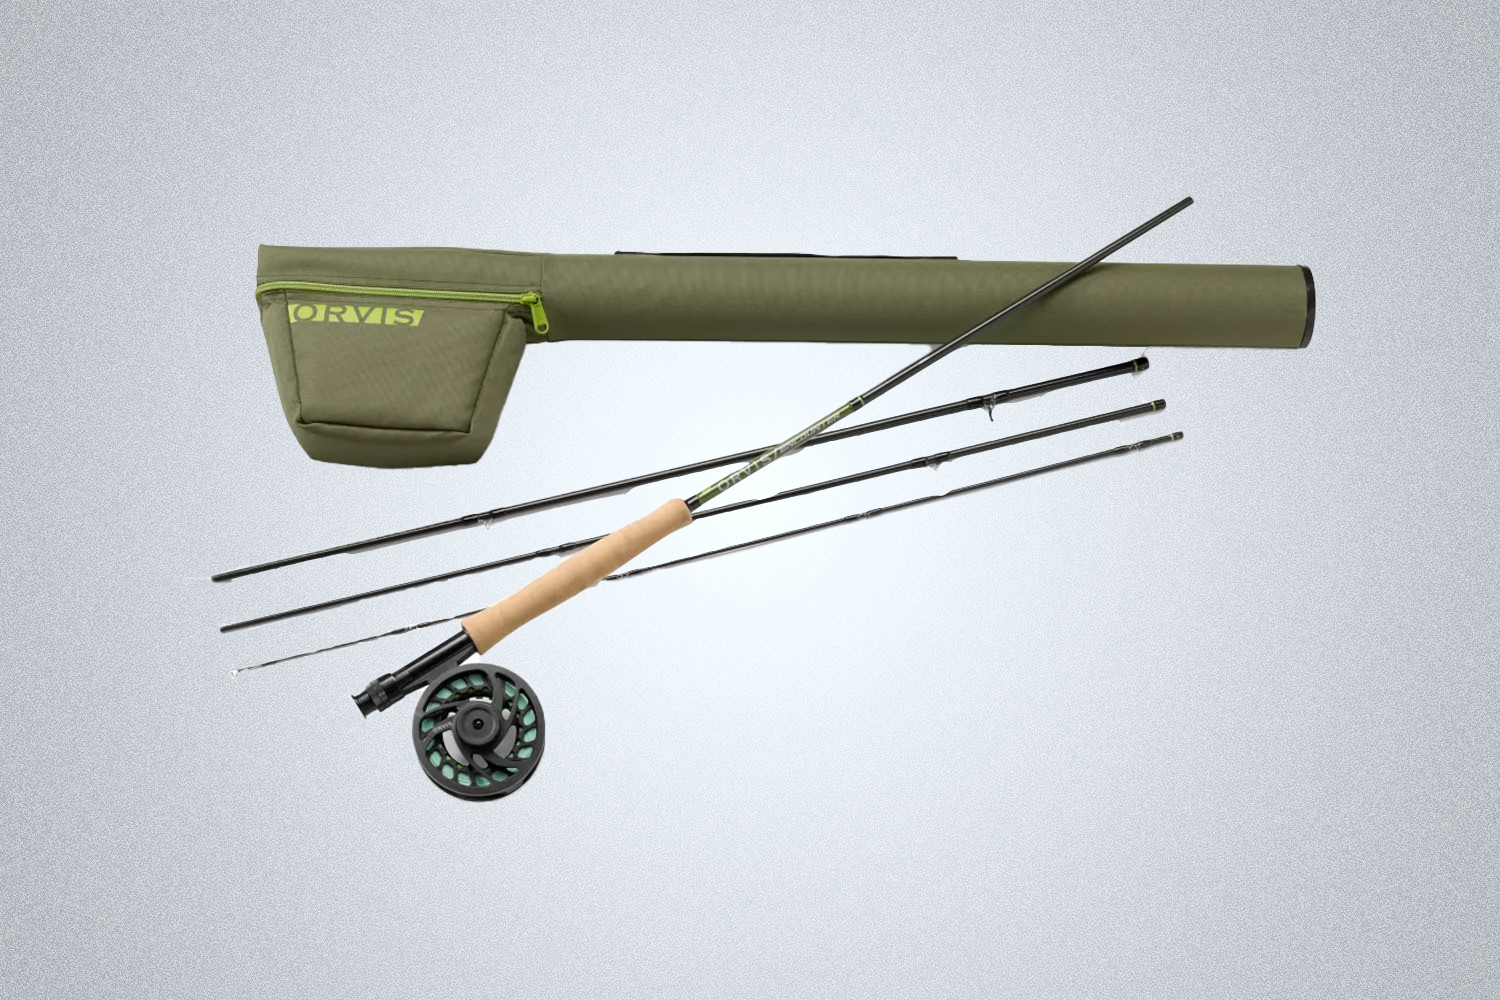 Orvis Encounter Fly Rod Outfit is the best beginner's fly fishing outfit in 2022